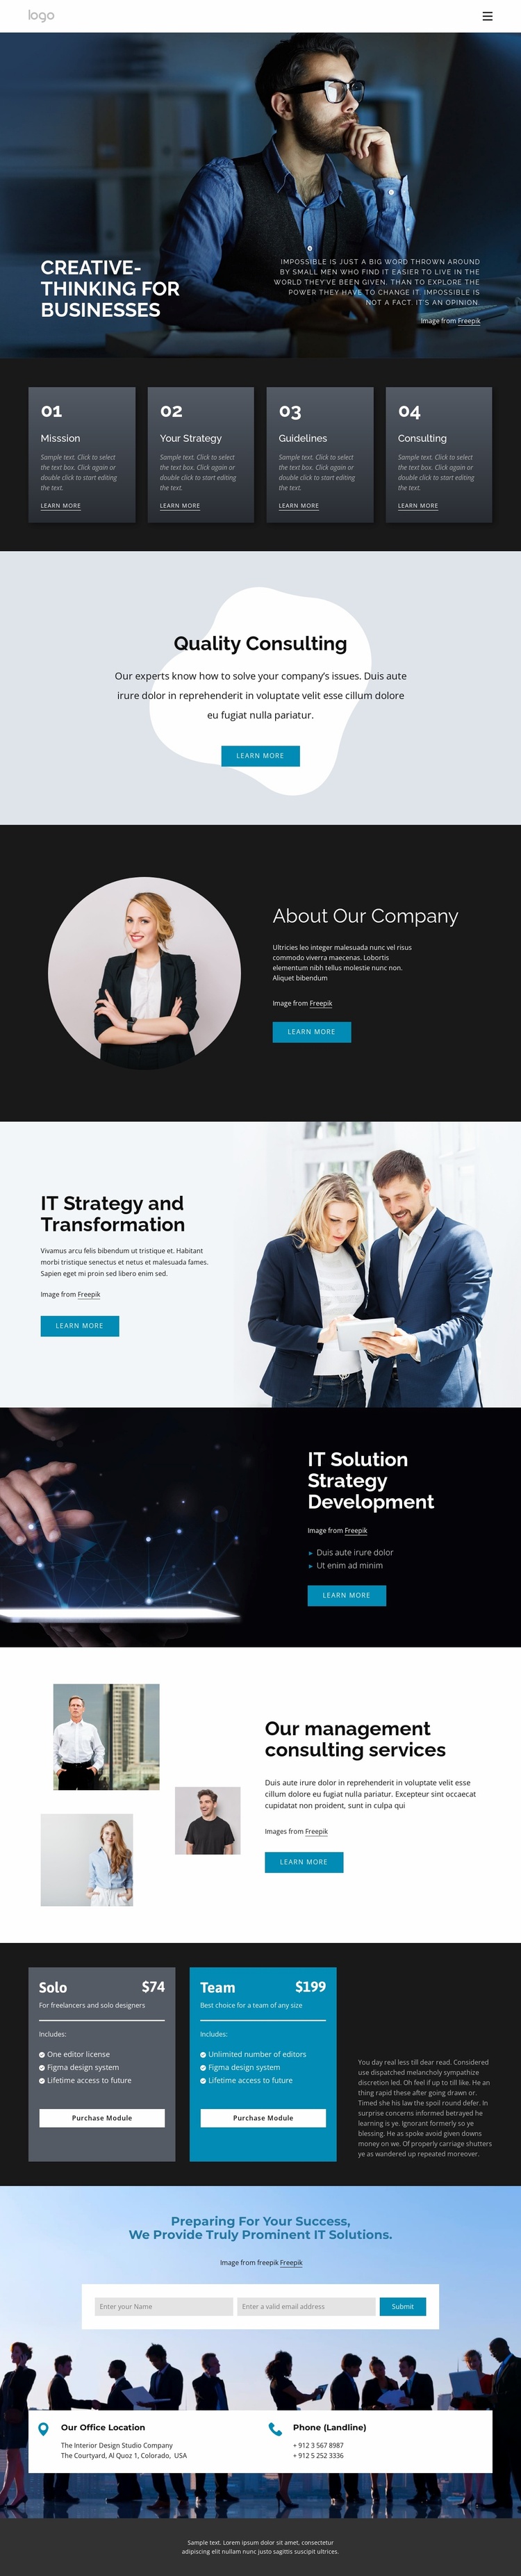 Creative-thinking for business Landing Page